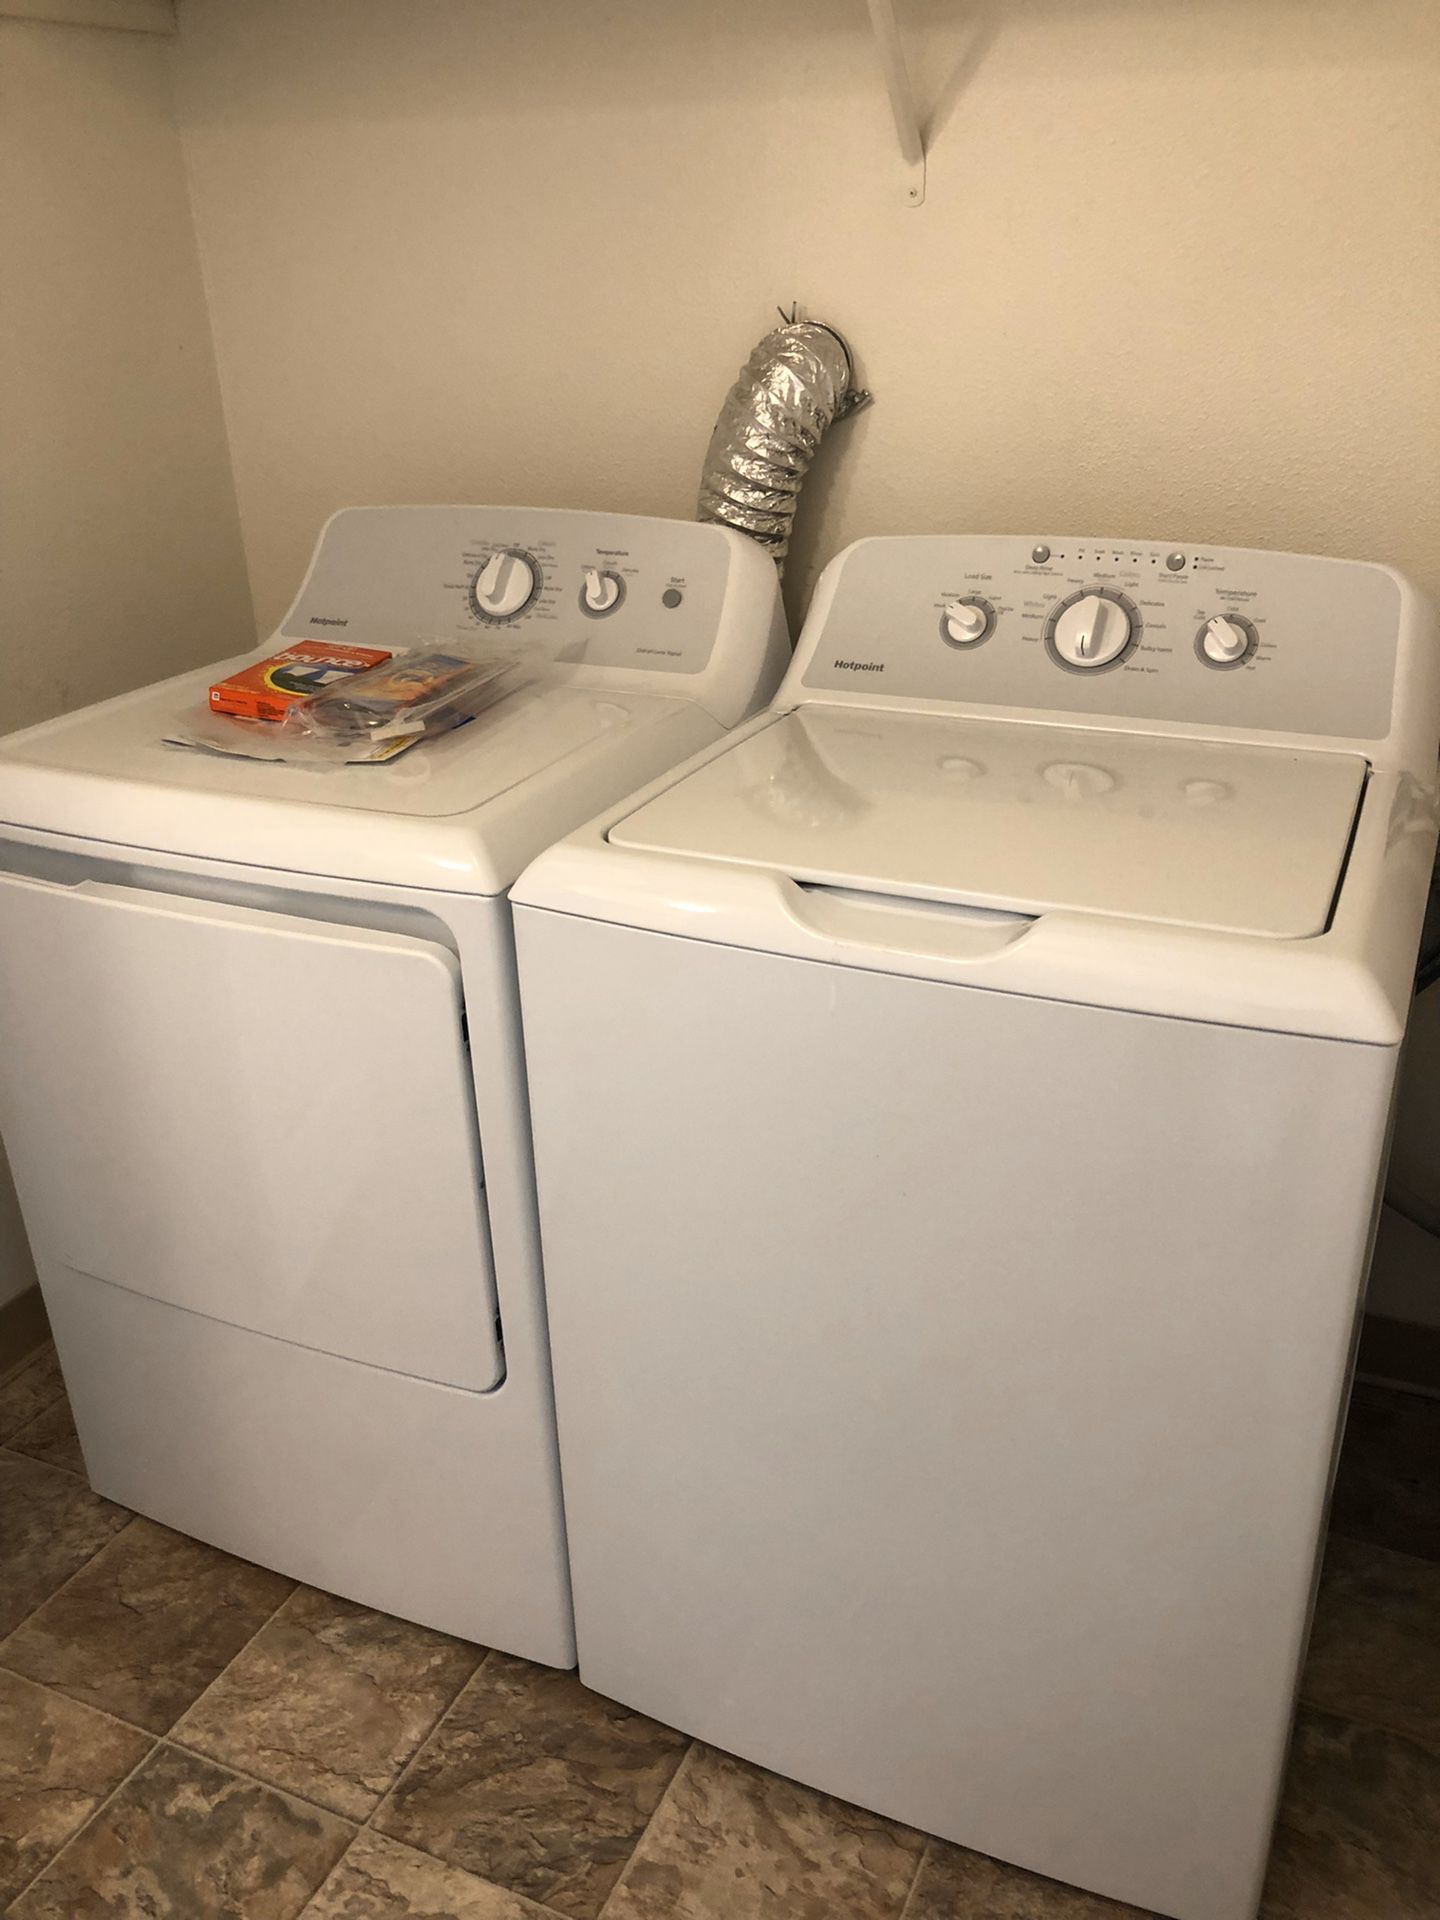 GE HOTPOINT WASHER AND DRYER BRAND NEW STILL IN BOX